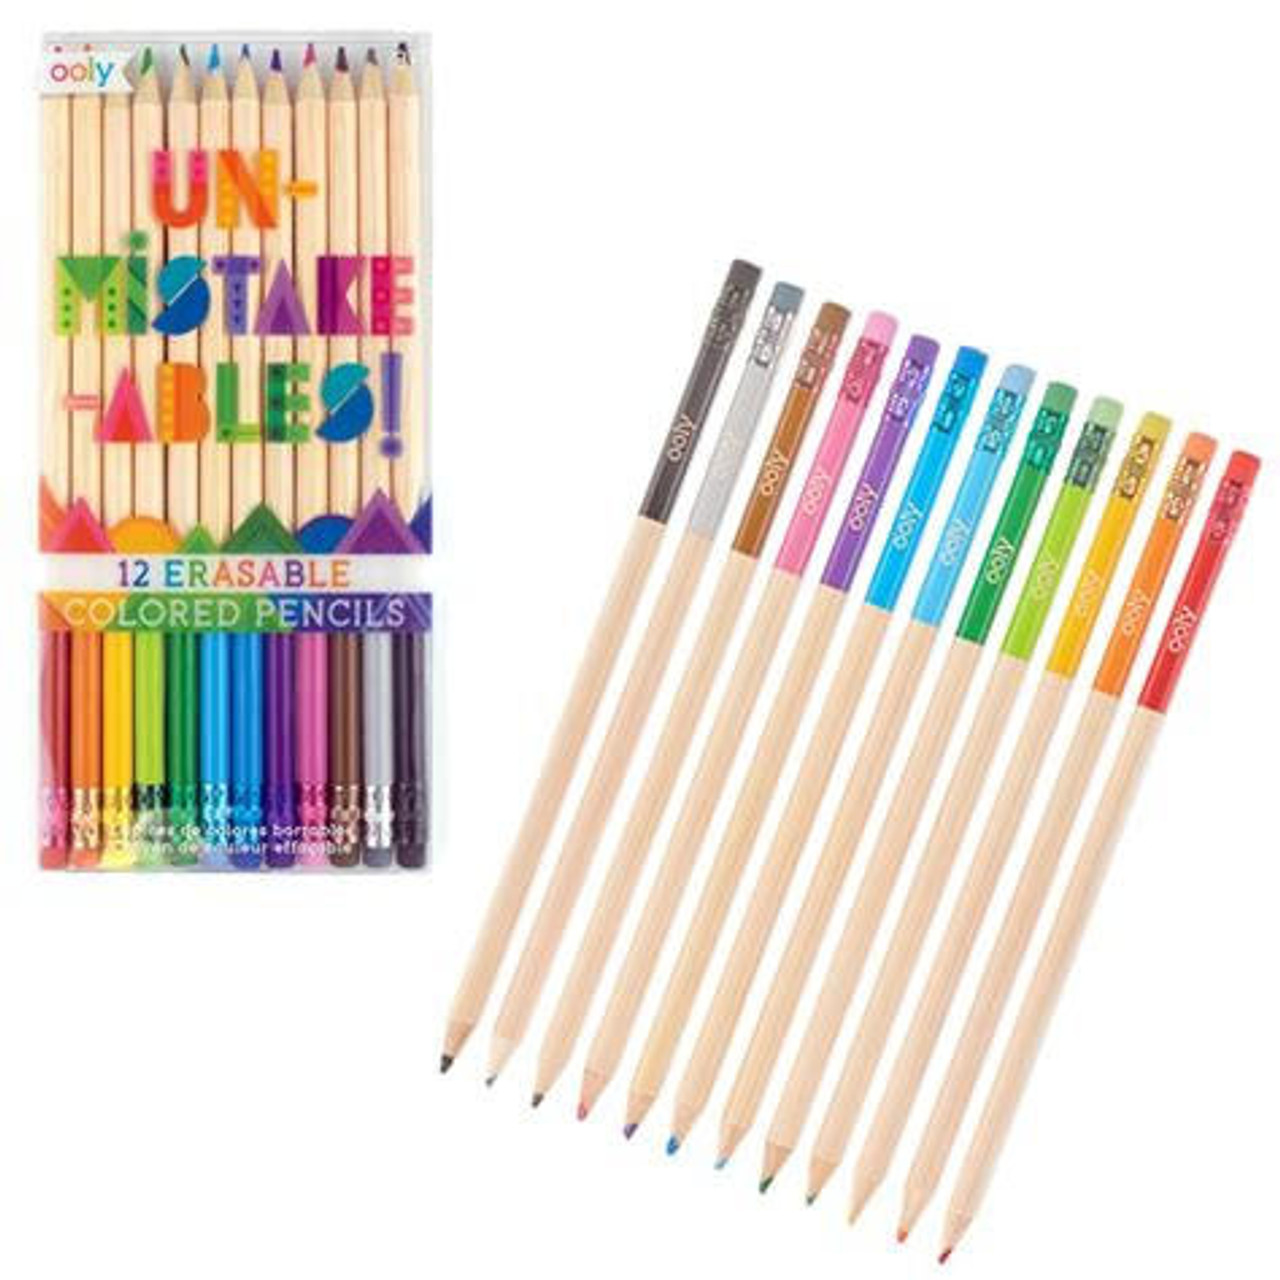 Short Colored Pencils Hinged Top Box with Built-in Pencil